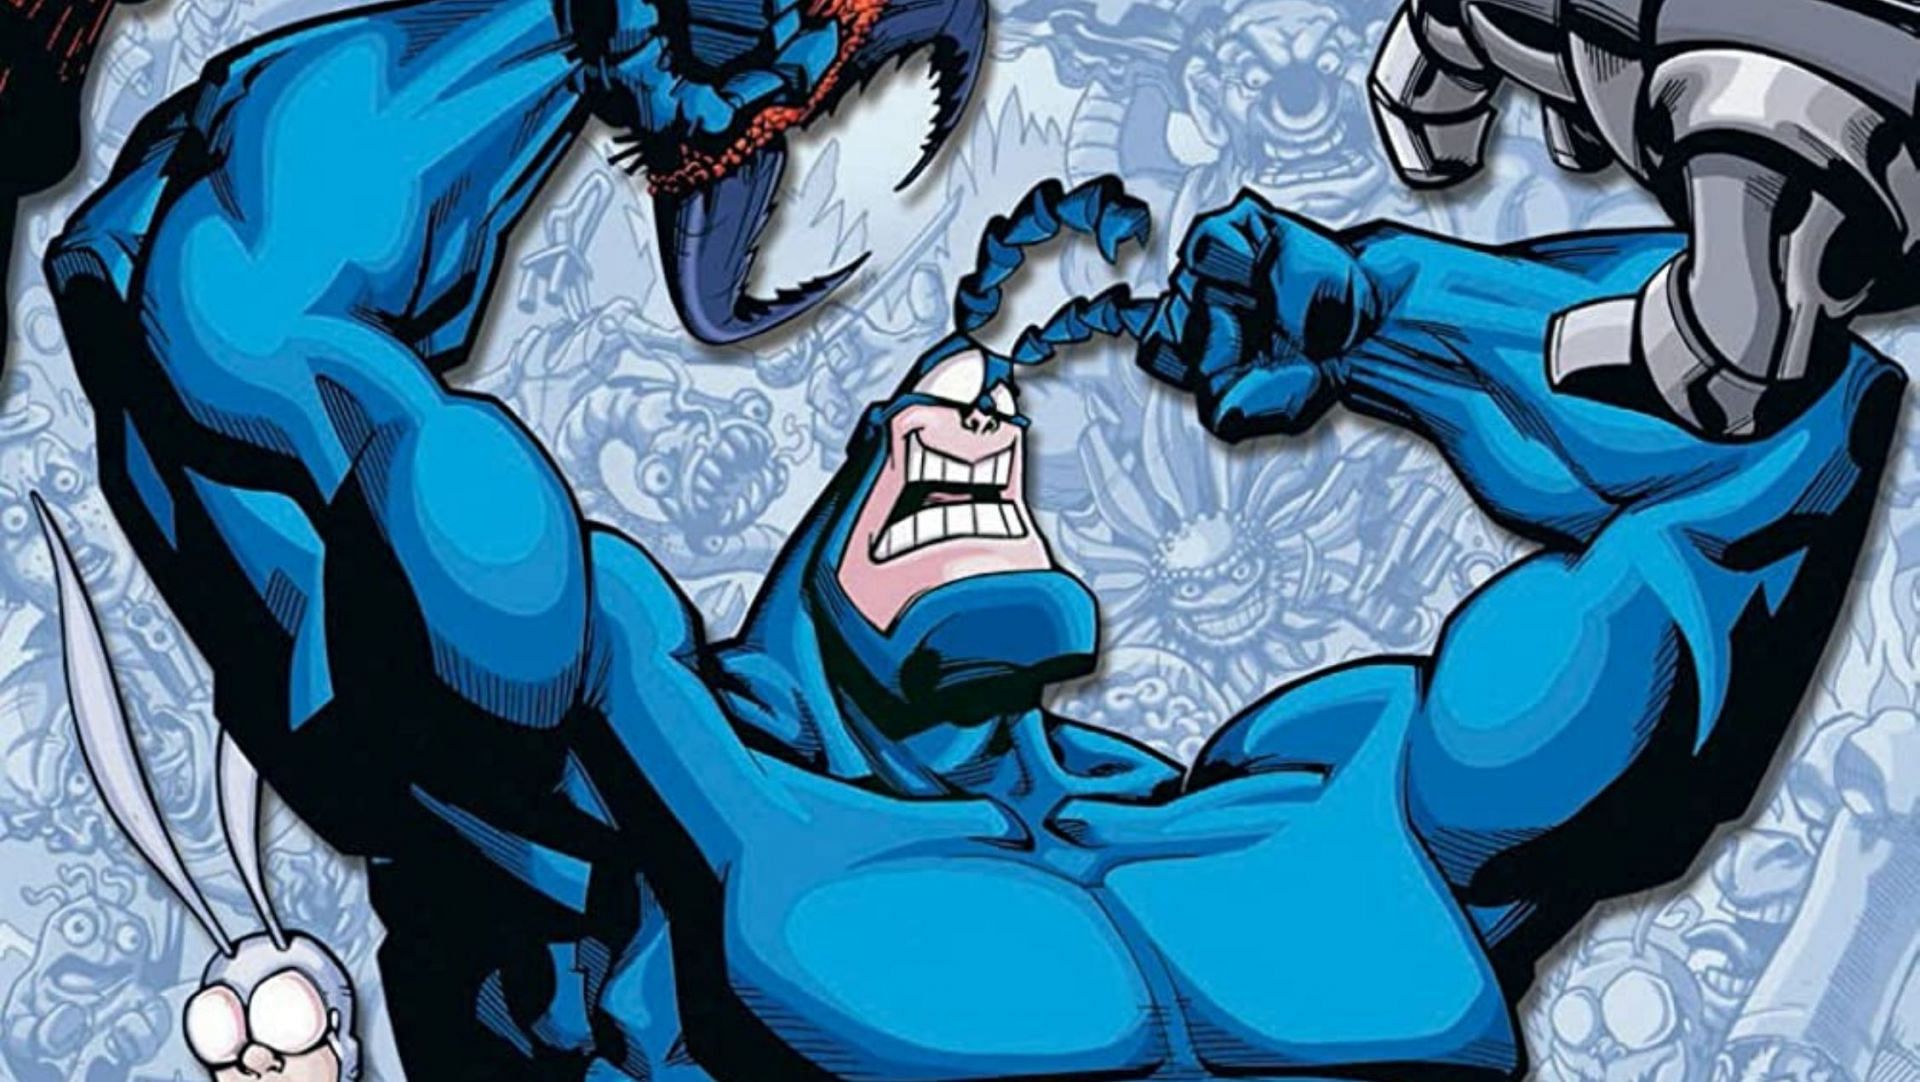 The Tick, the lovable and quirky hero from comics, TV, and film, strikes a humorous pose in his blue suit and antennae (Image via New England Comics)